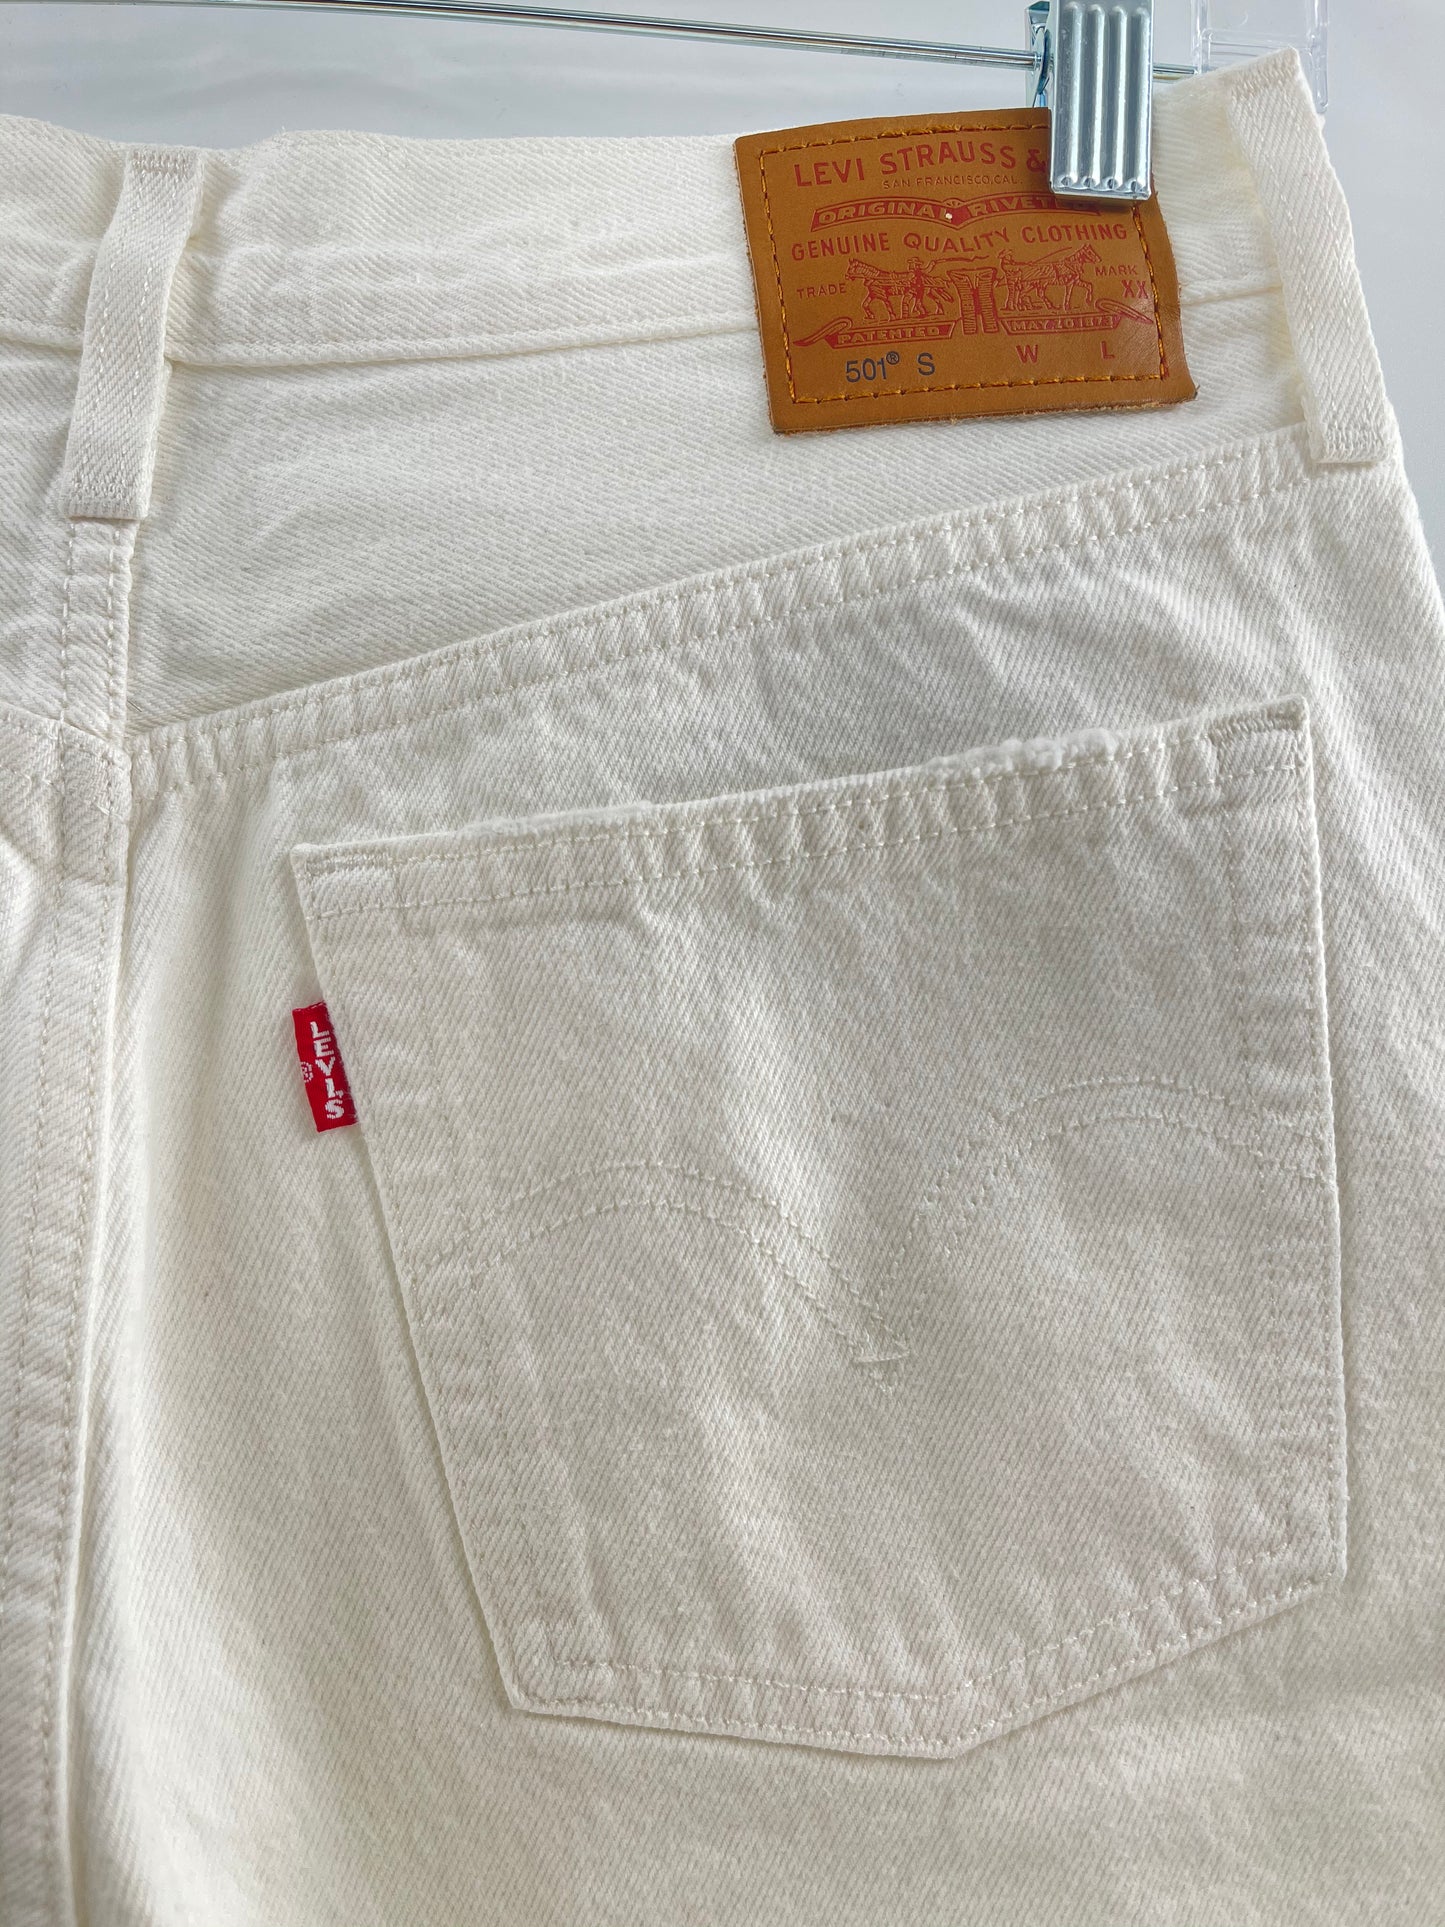 Levi Strauss 501’s White Ripped Jeans (Size S)